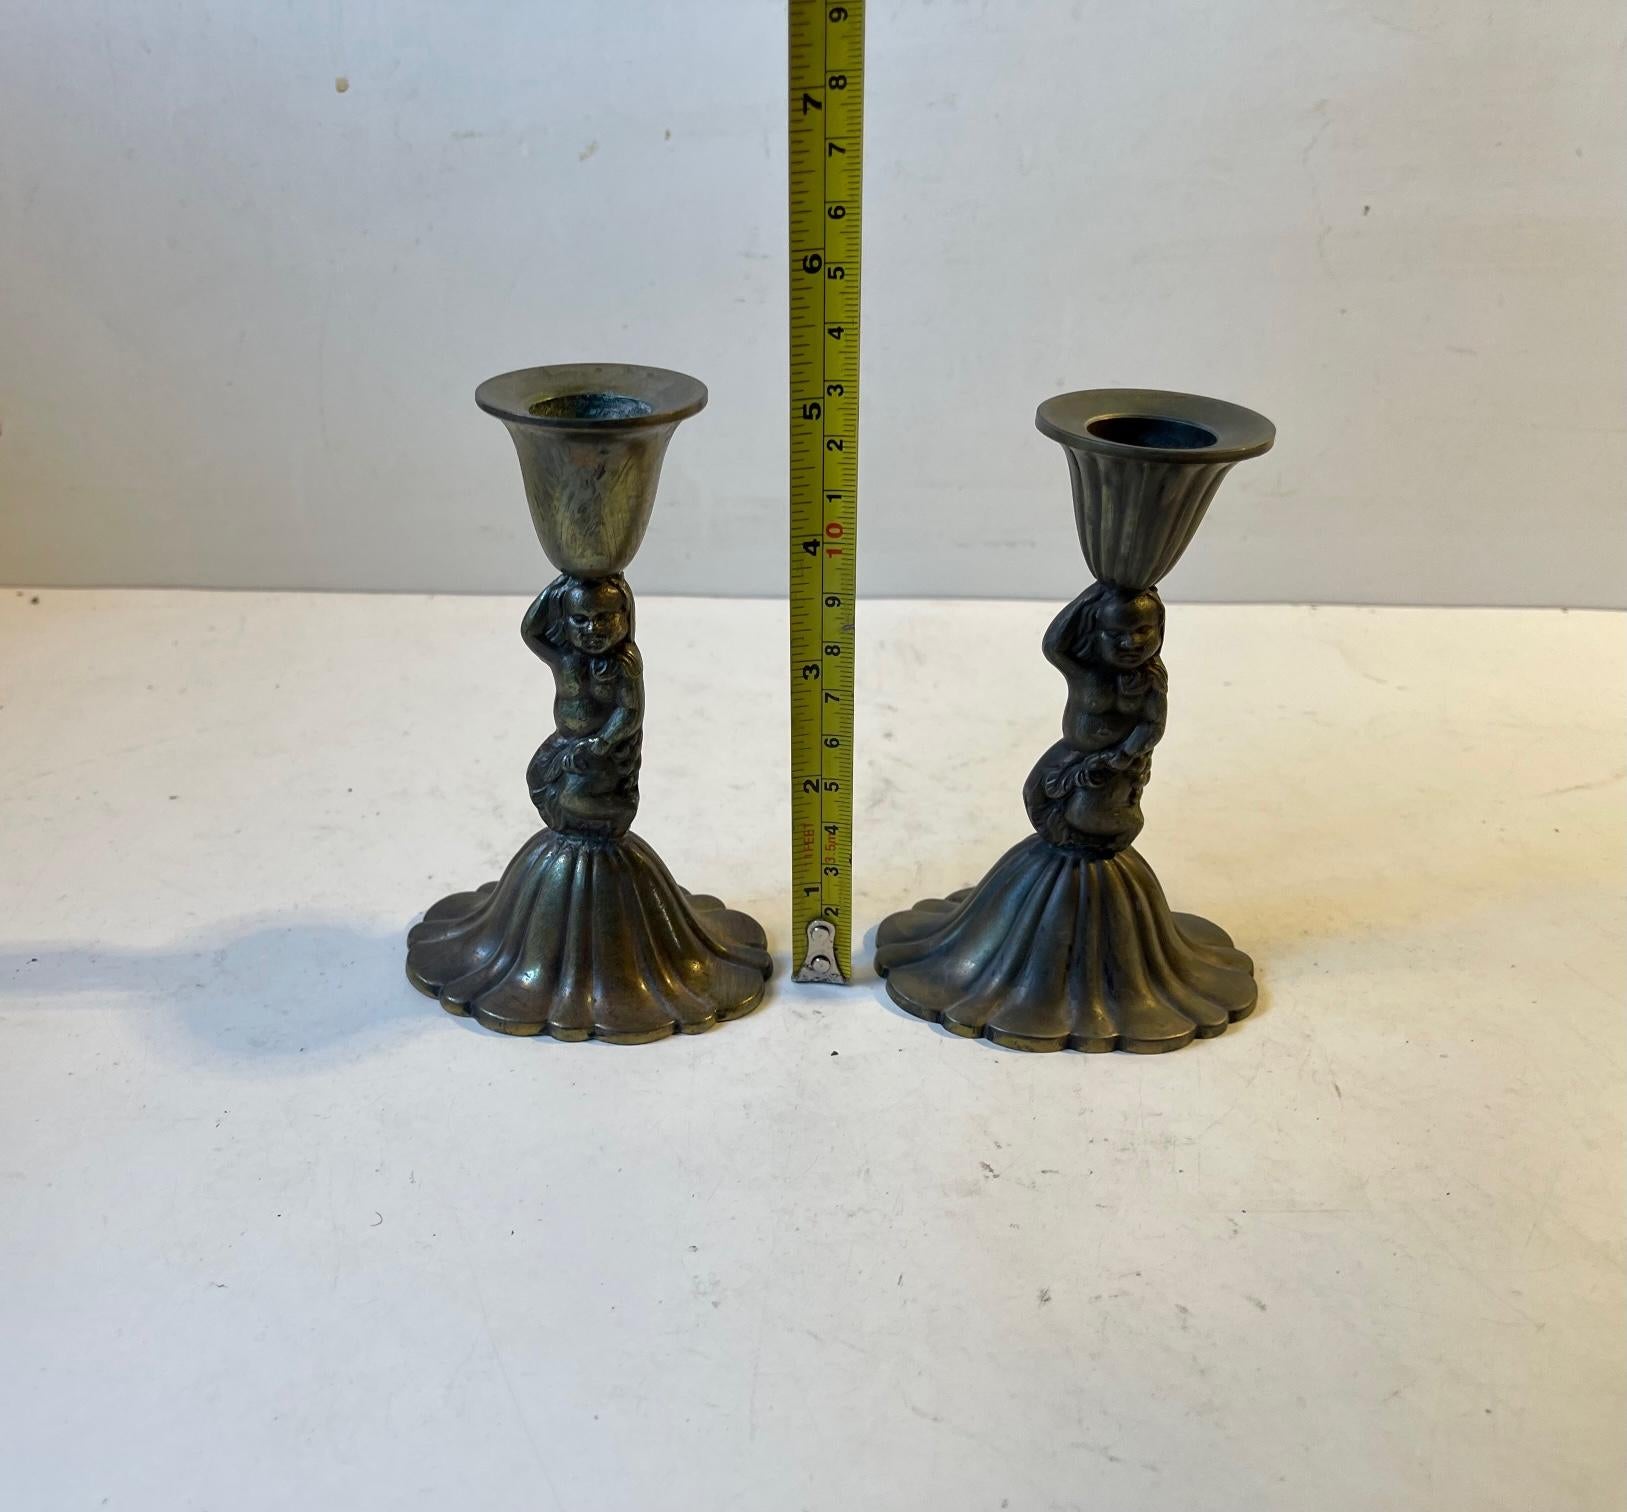 Vintage Italian Candleholders with Cherubs, 1940s For Sale 1